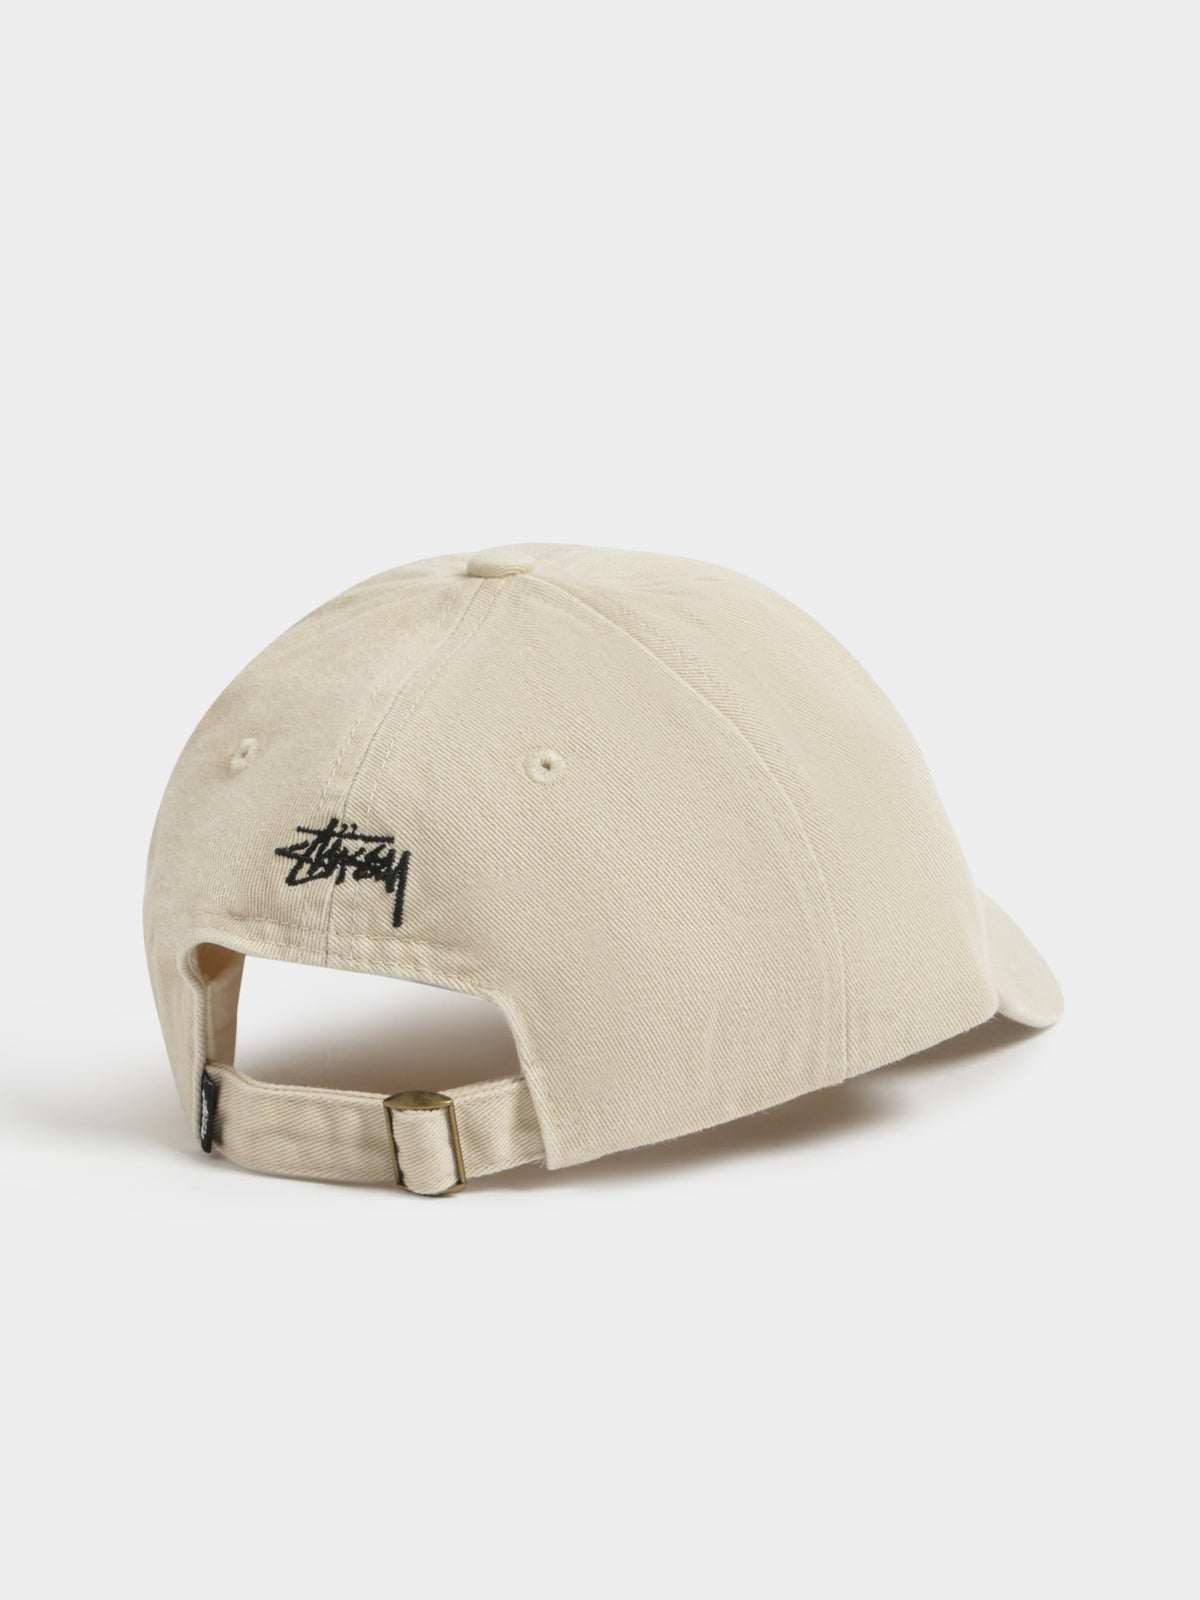 Embroidered Crown Stock Low-Pro Cap in White Sand